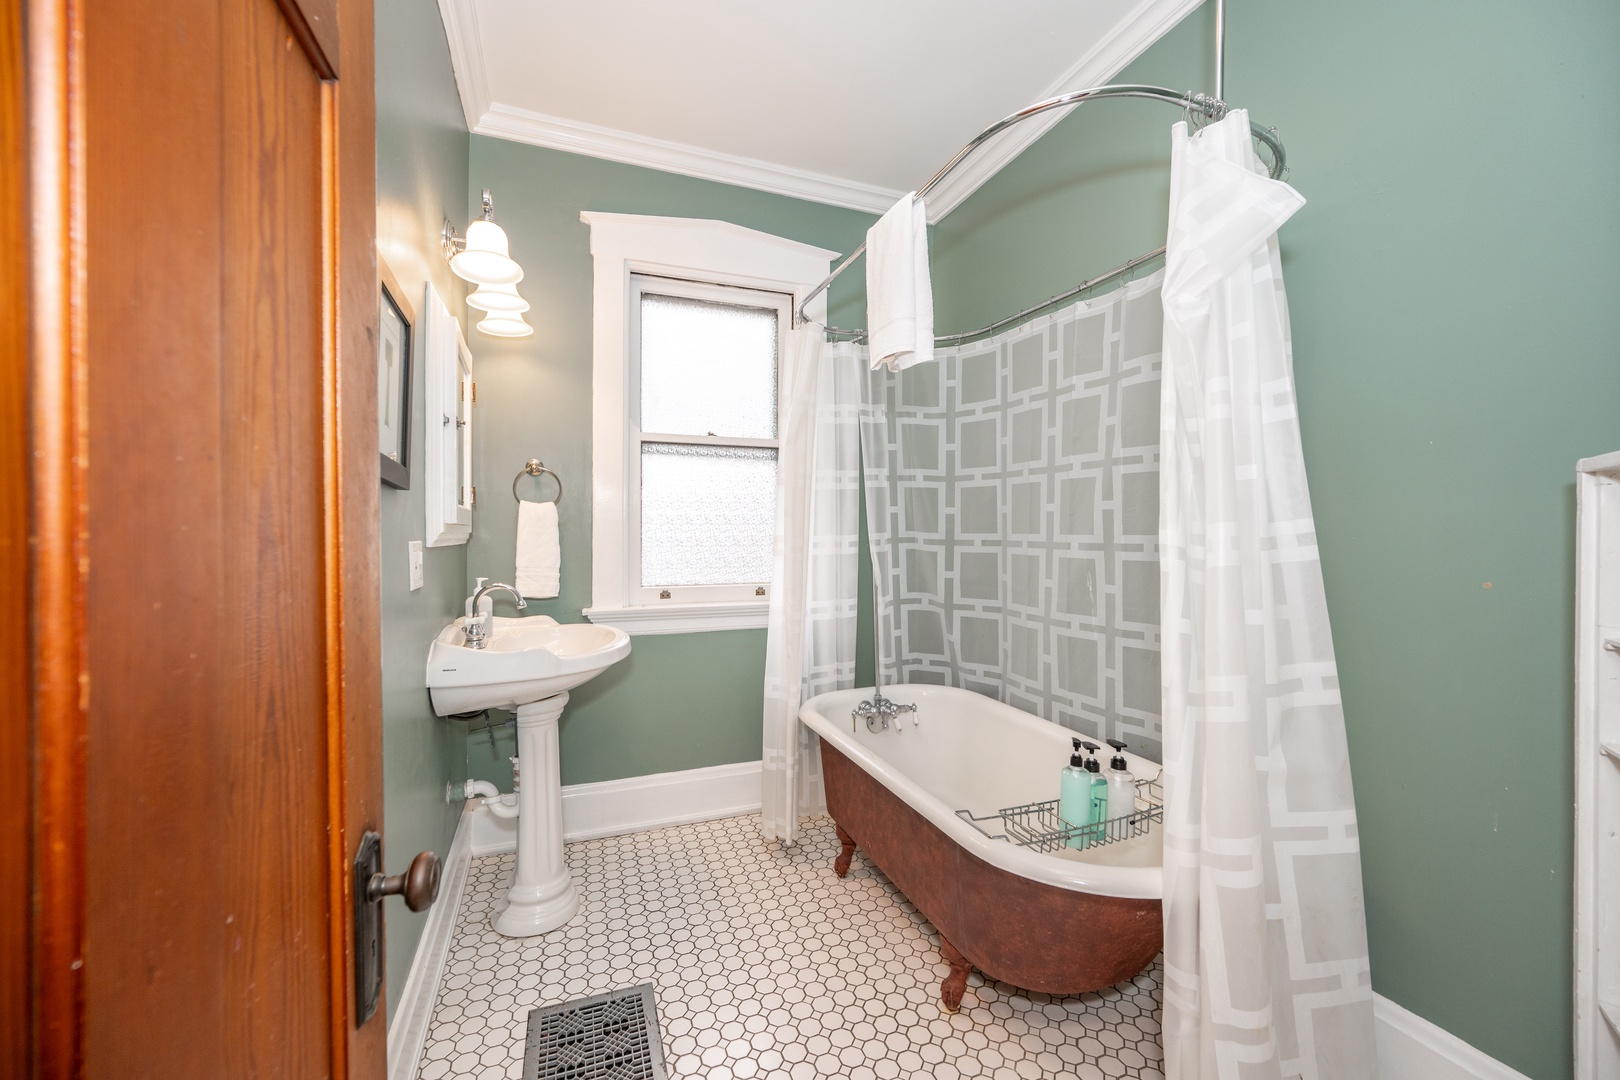 A pedestal sink & claw-foot tub with shower awaits in the 2nd floor full bath